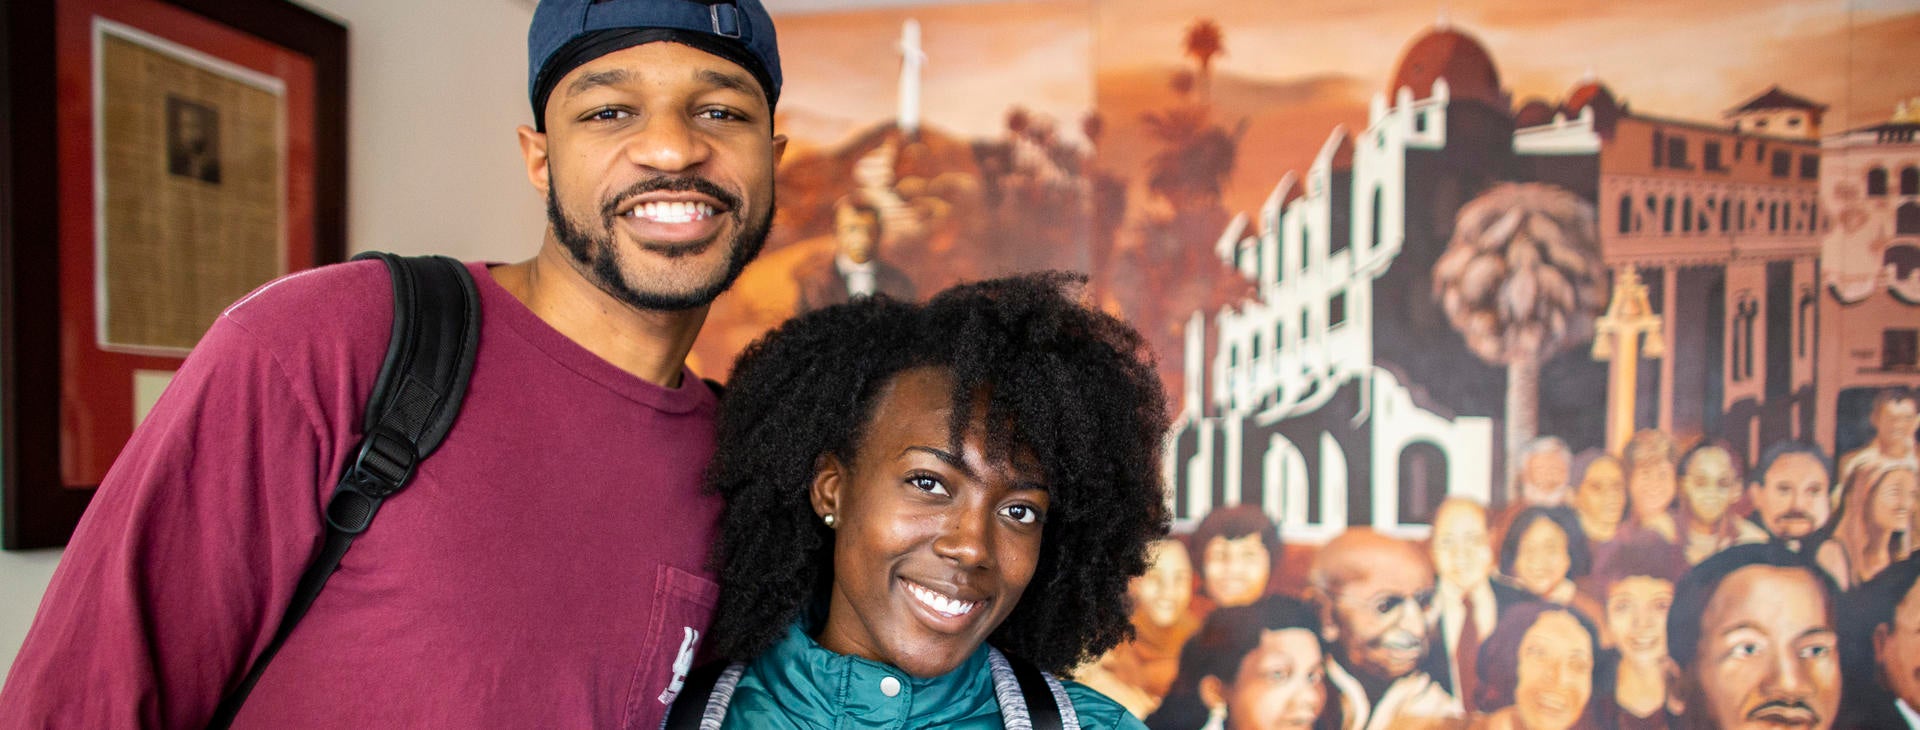 Two students smiling in front of a mural of black leaders